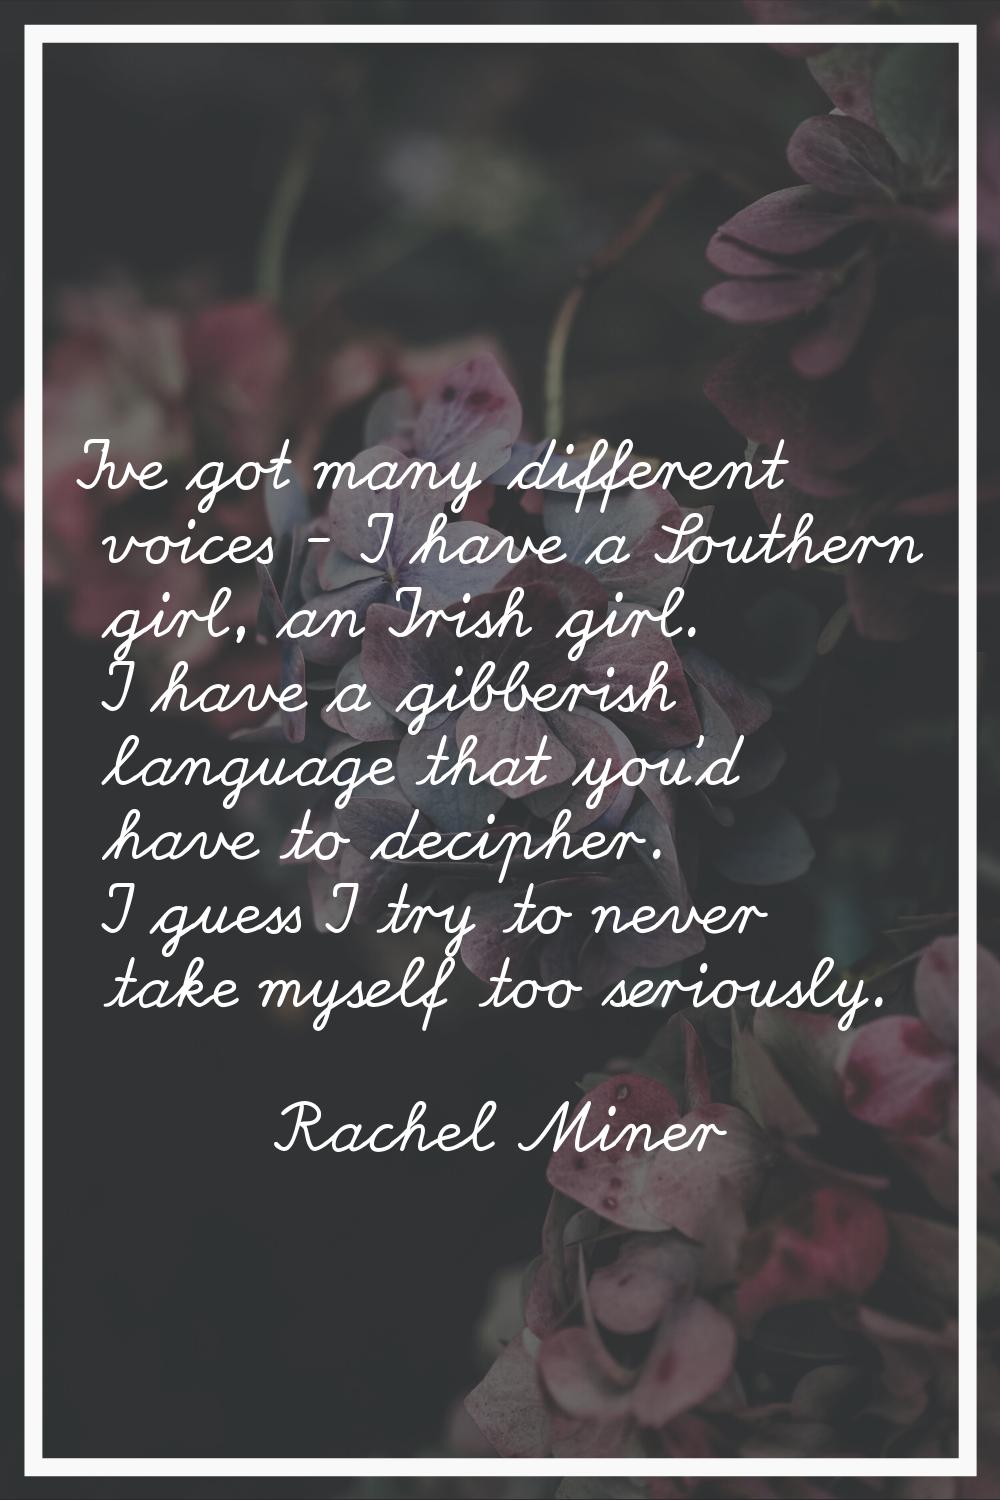 I've got many different voices - I have a Southern girl, an Irish girl. I have a gibberish language